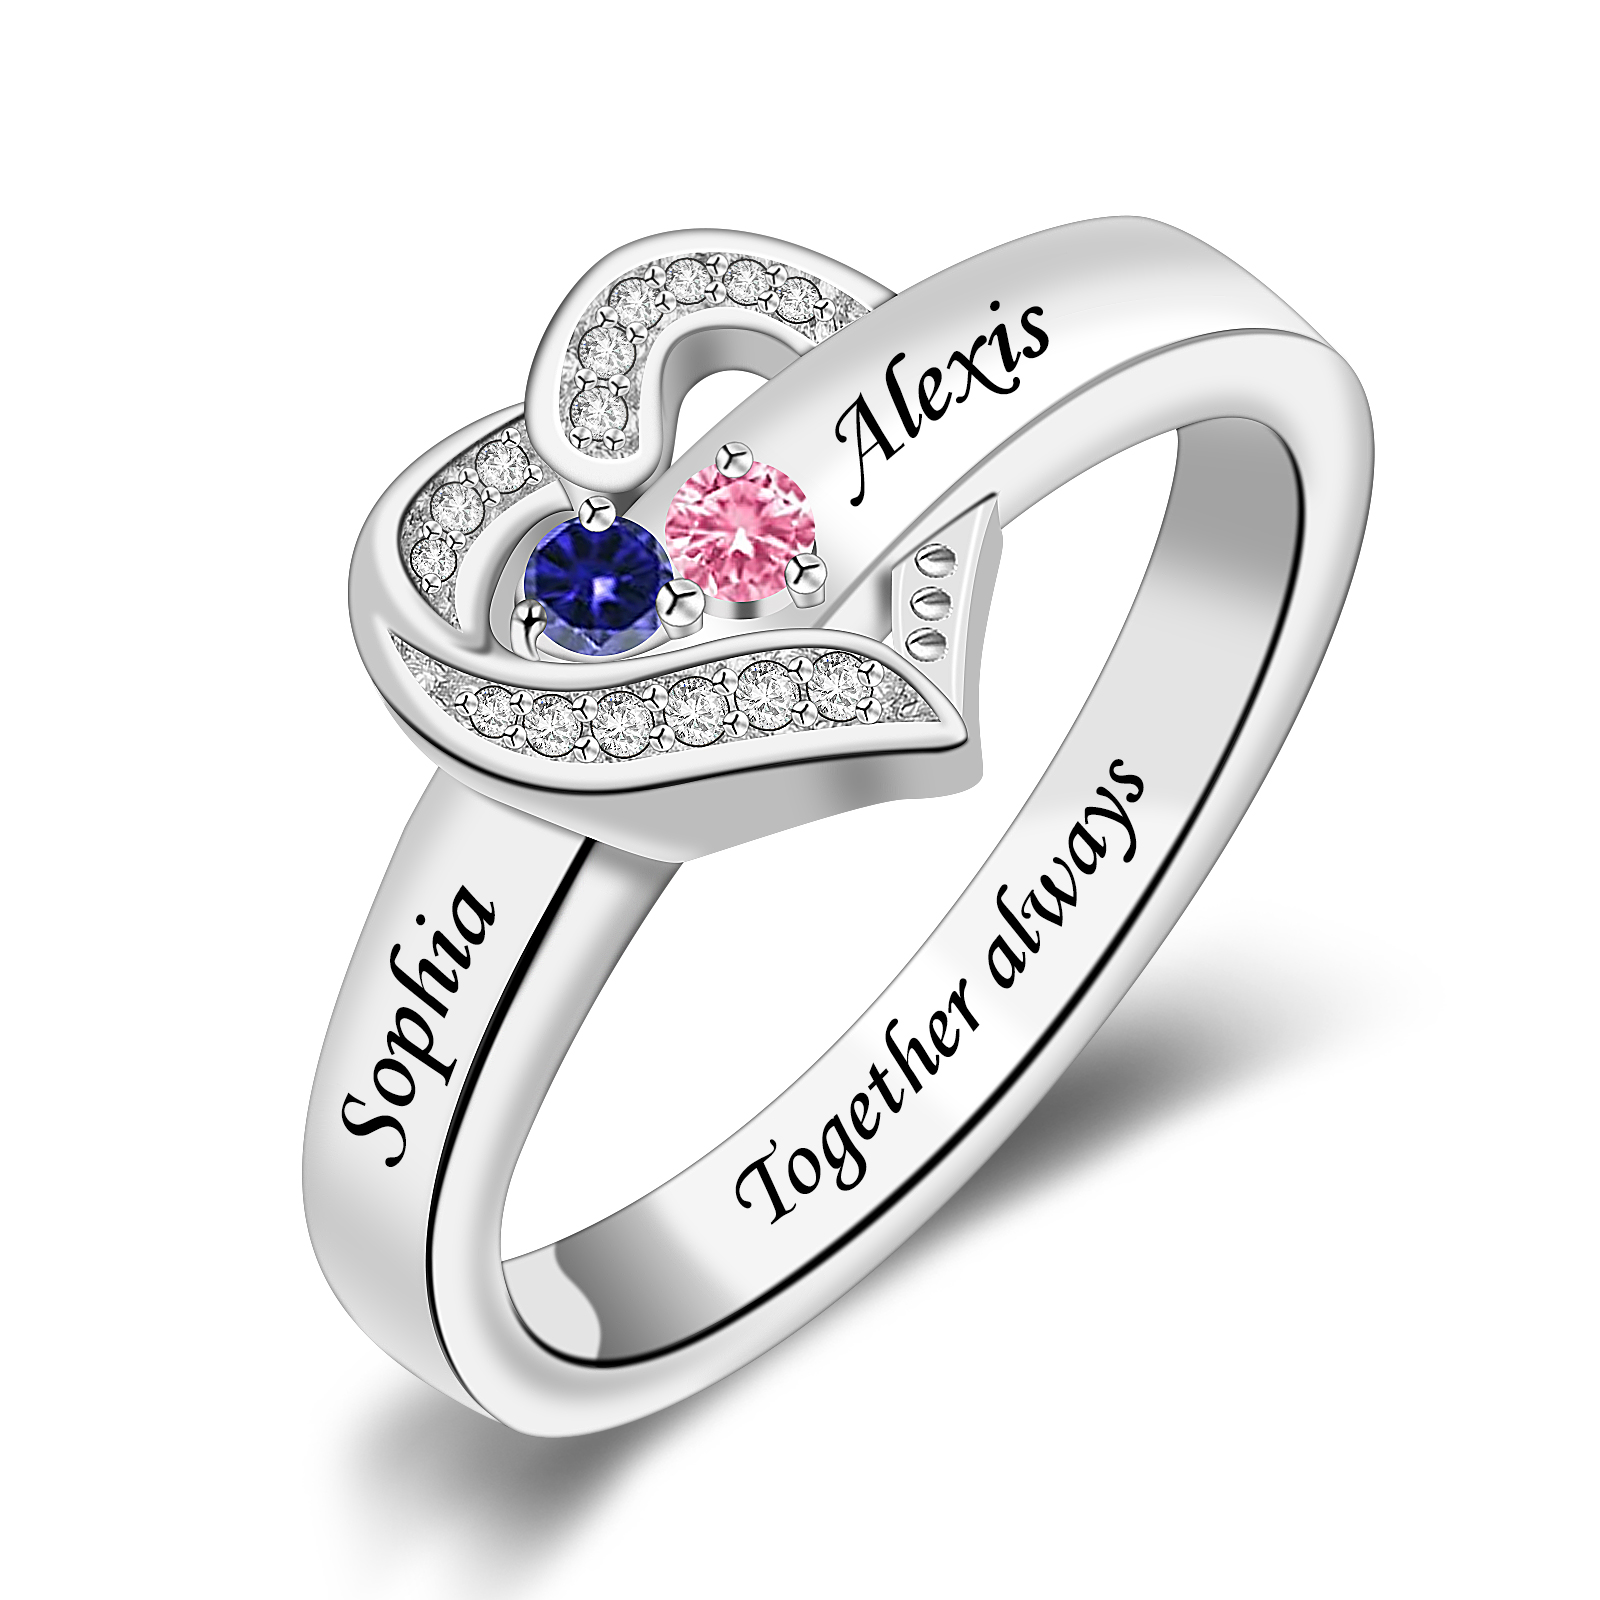 R6-1-2 Heart Mother Ring with Engraved Names and Simulated Birthstone